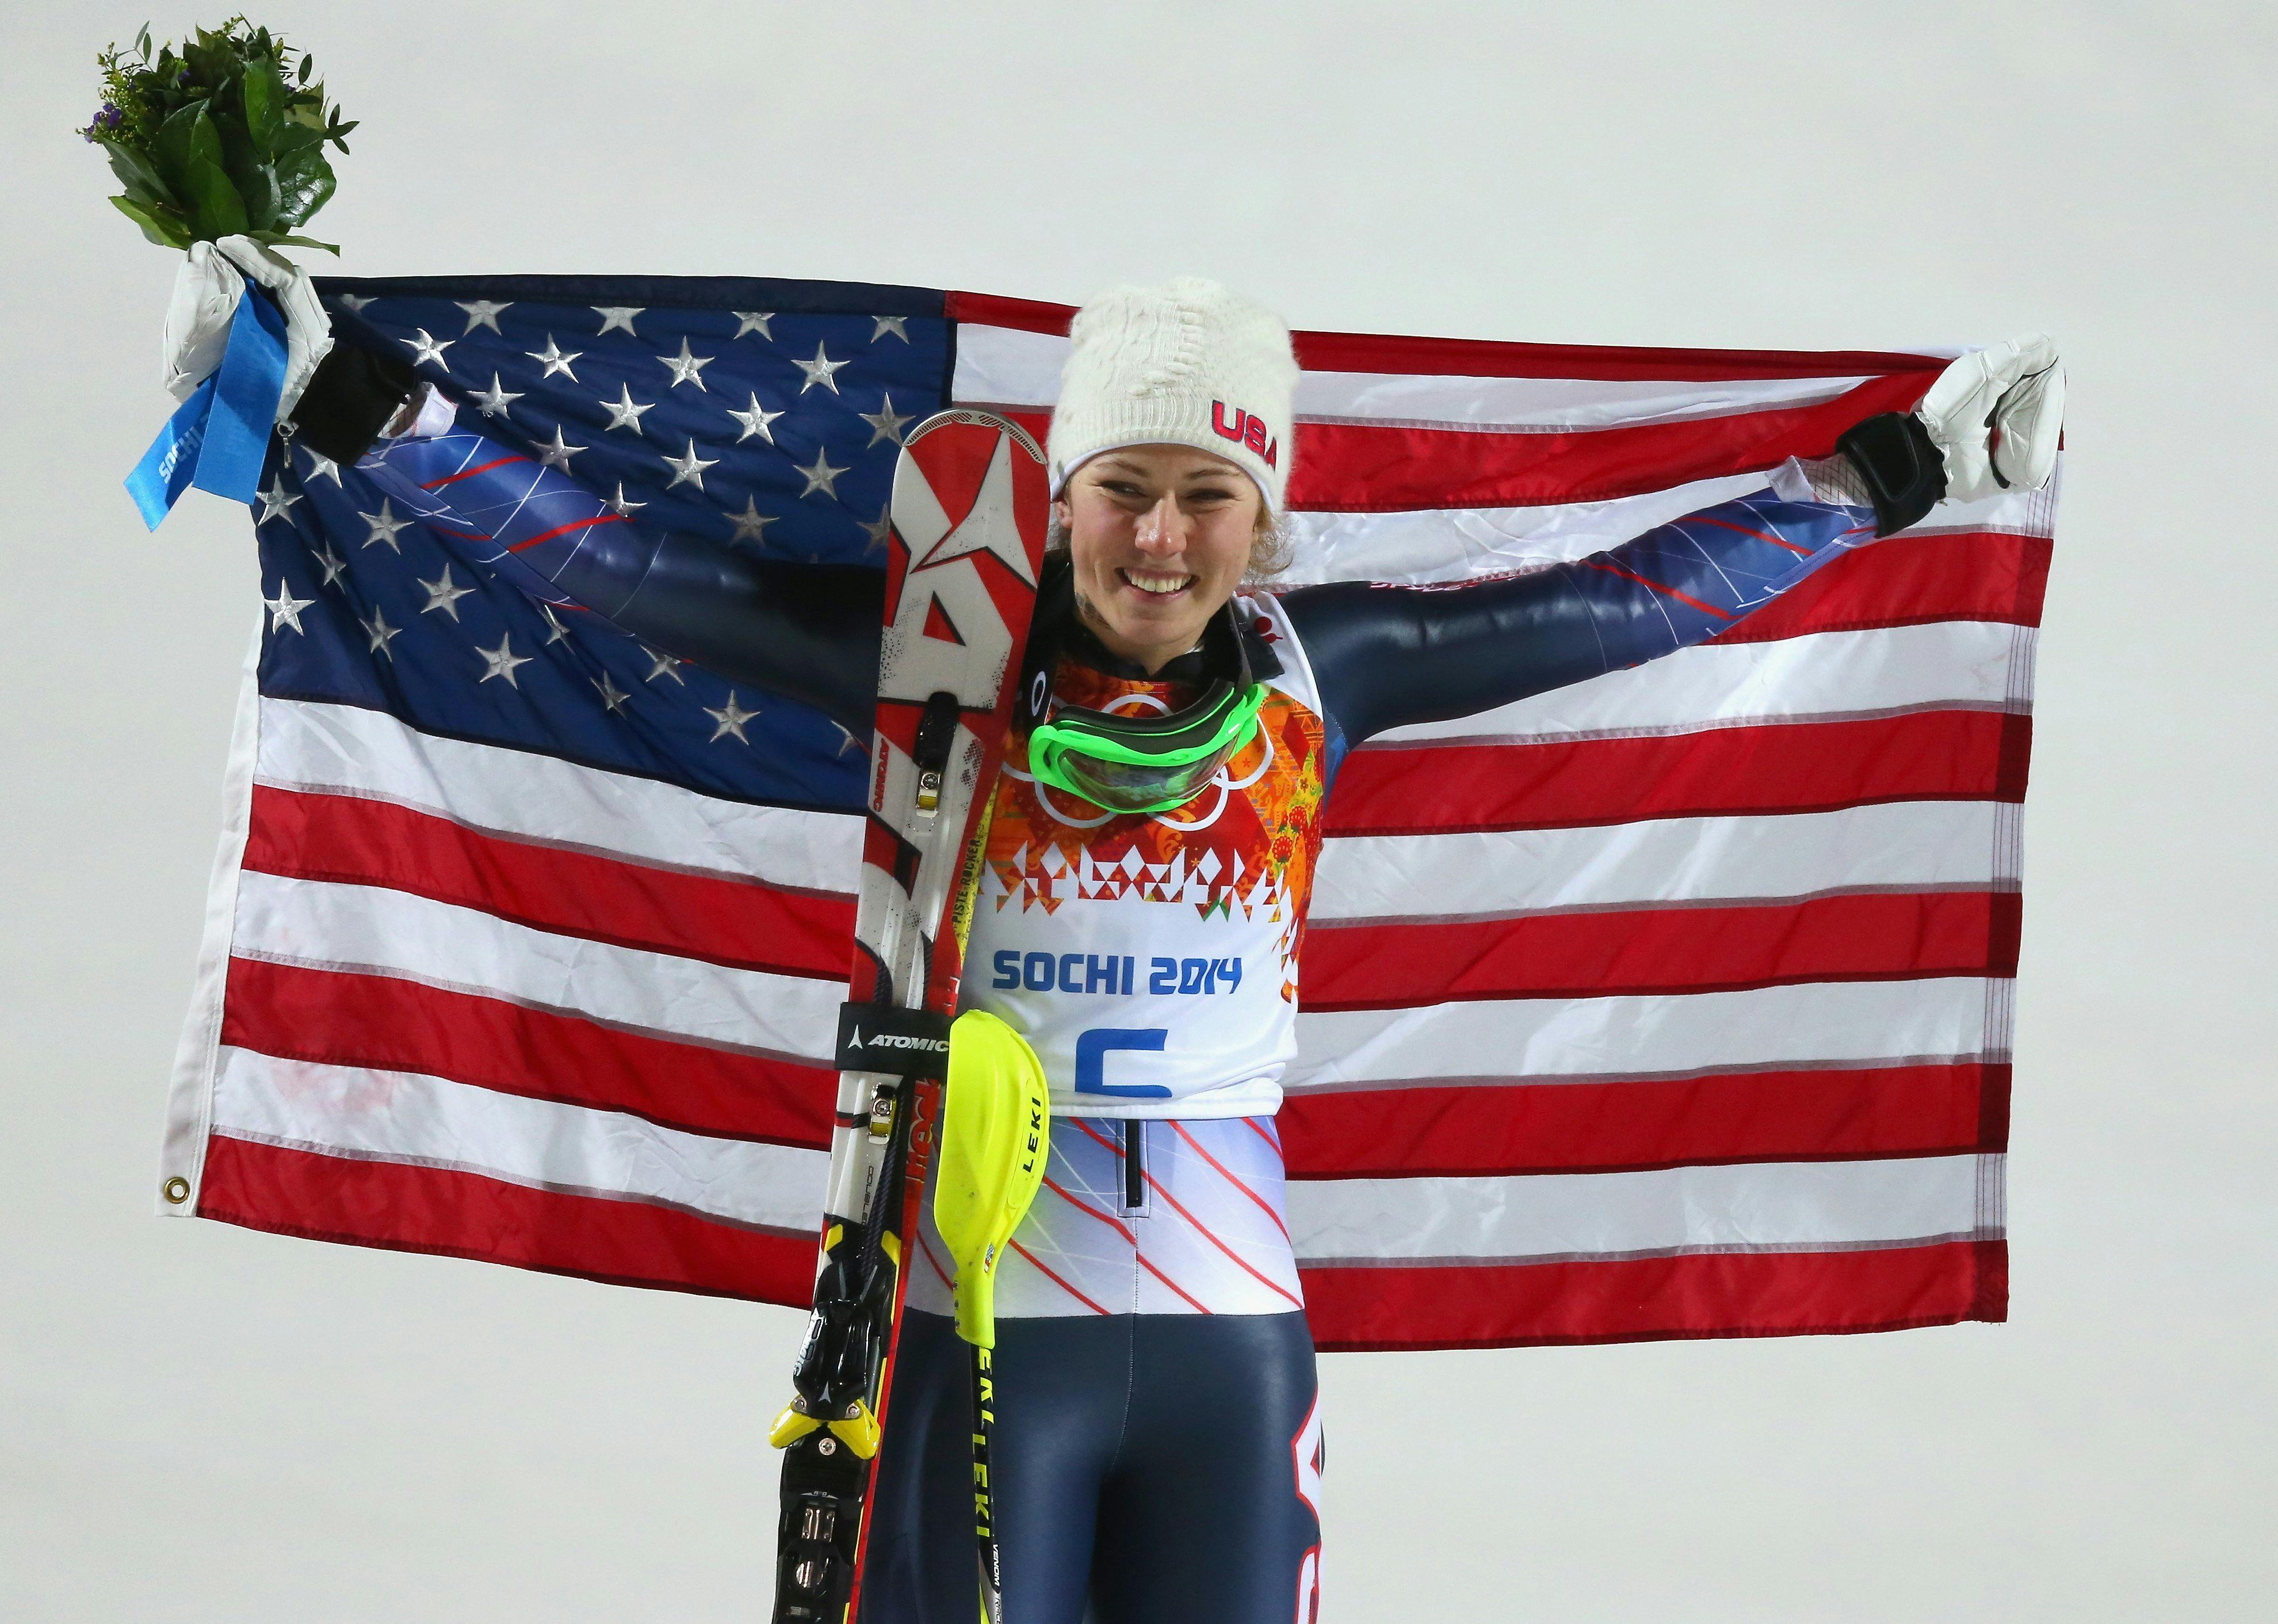 Mikaela Shiffrin holding up an American flag